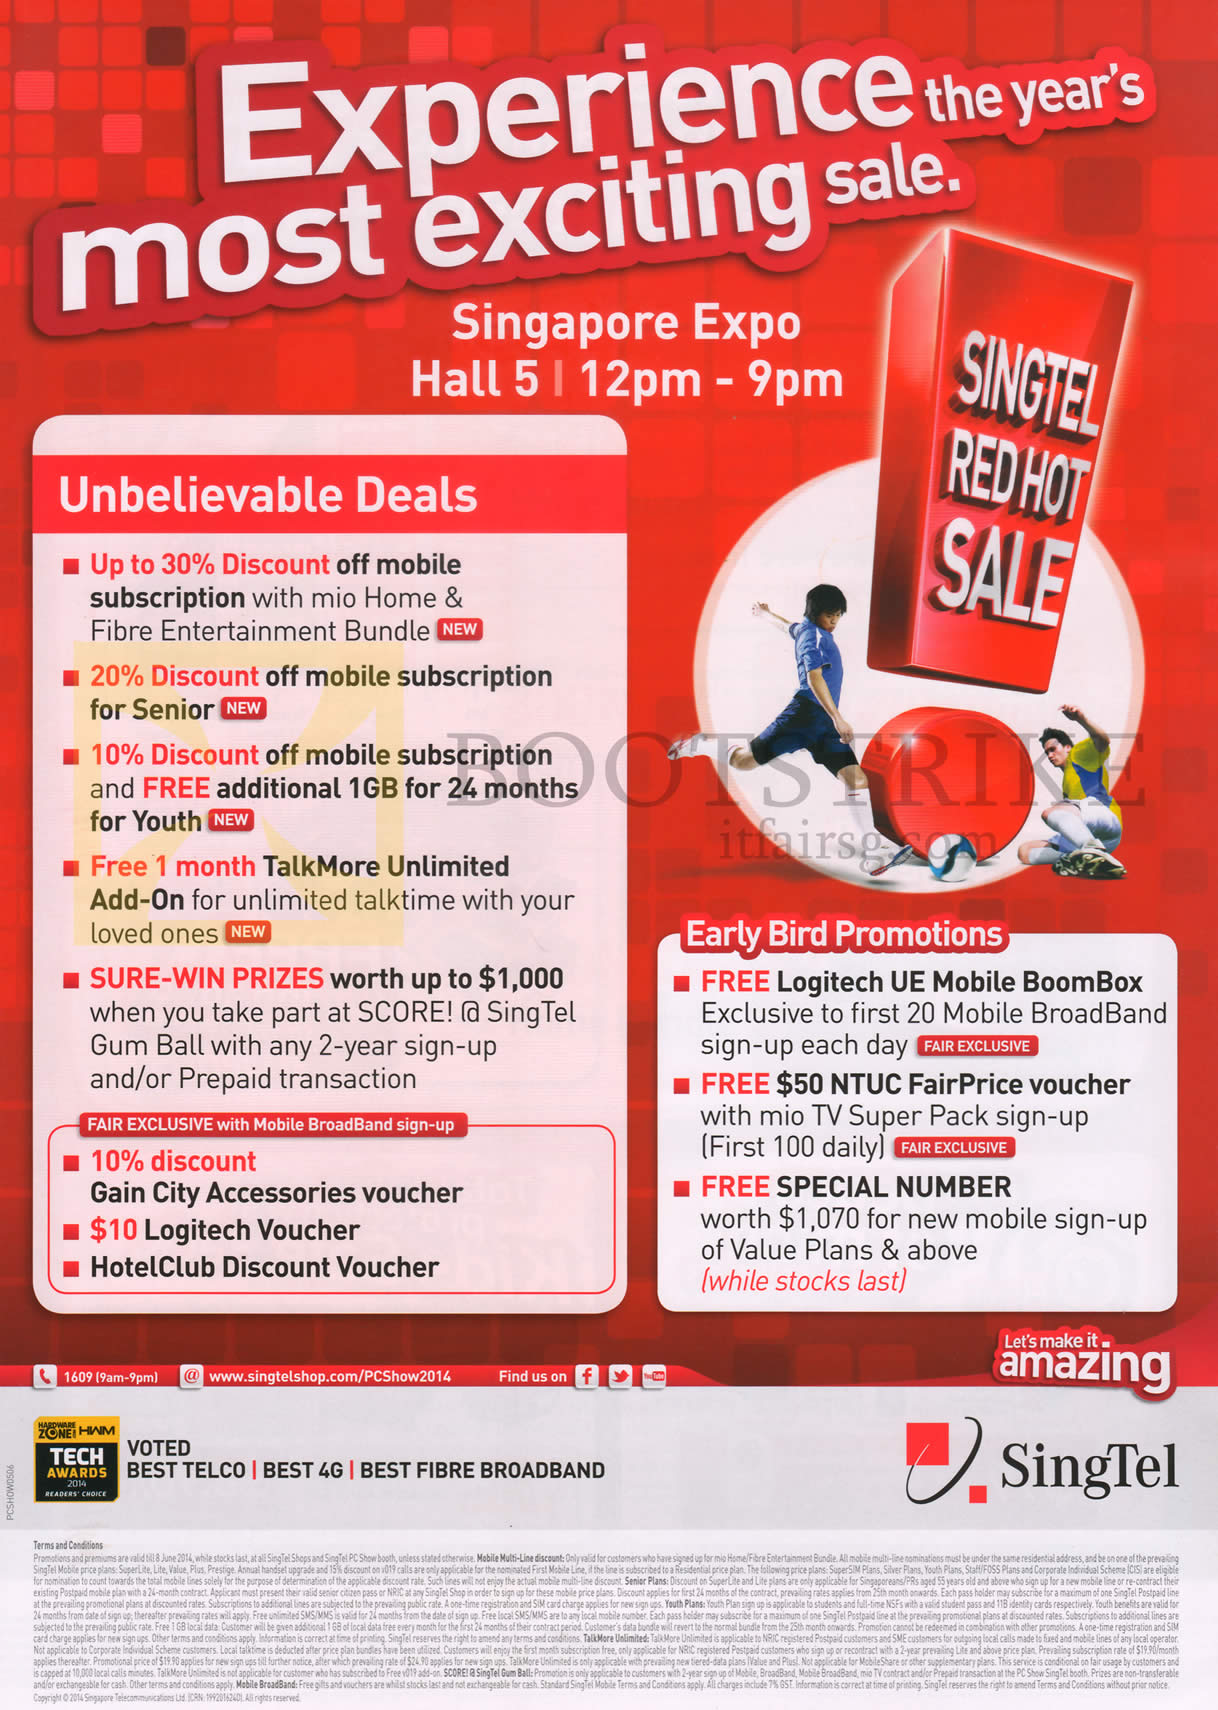 PC SHOW 2014 price list image brochure of Singtel Early Bird Promotions, PC Show Highlights